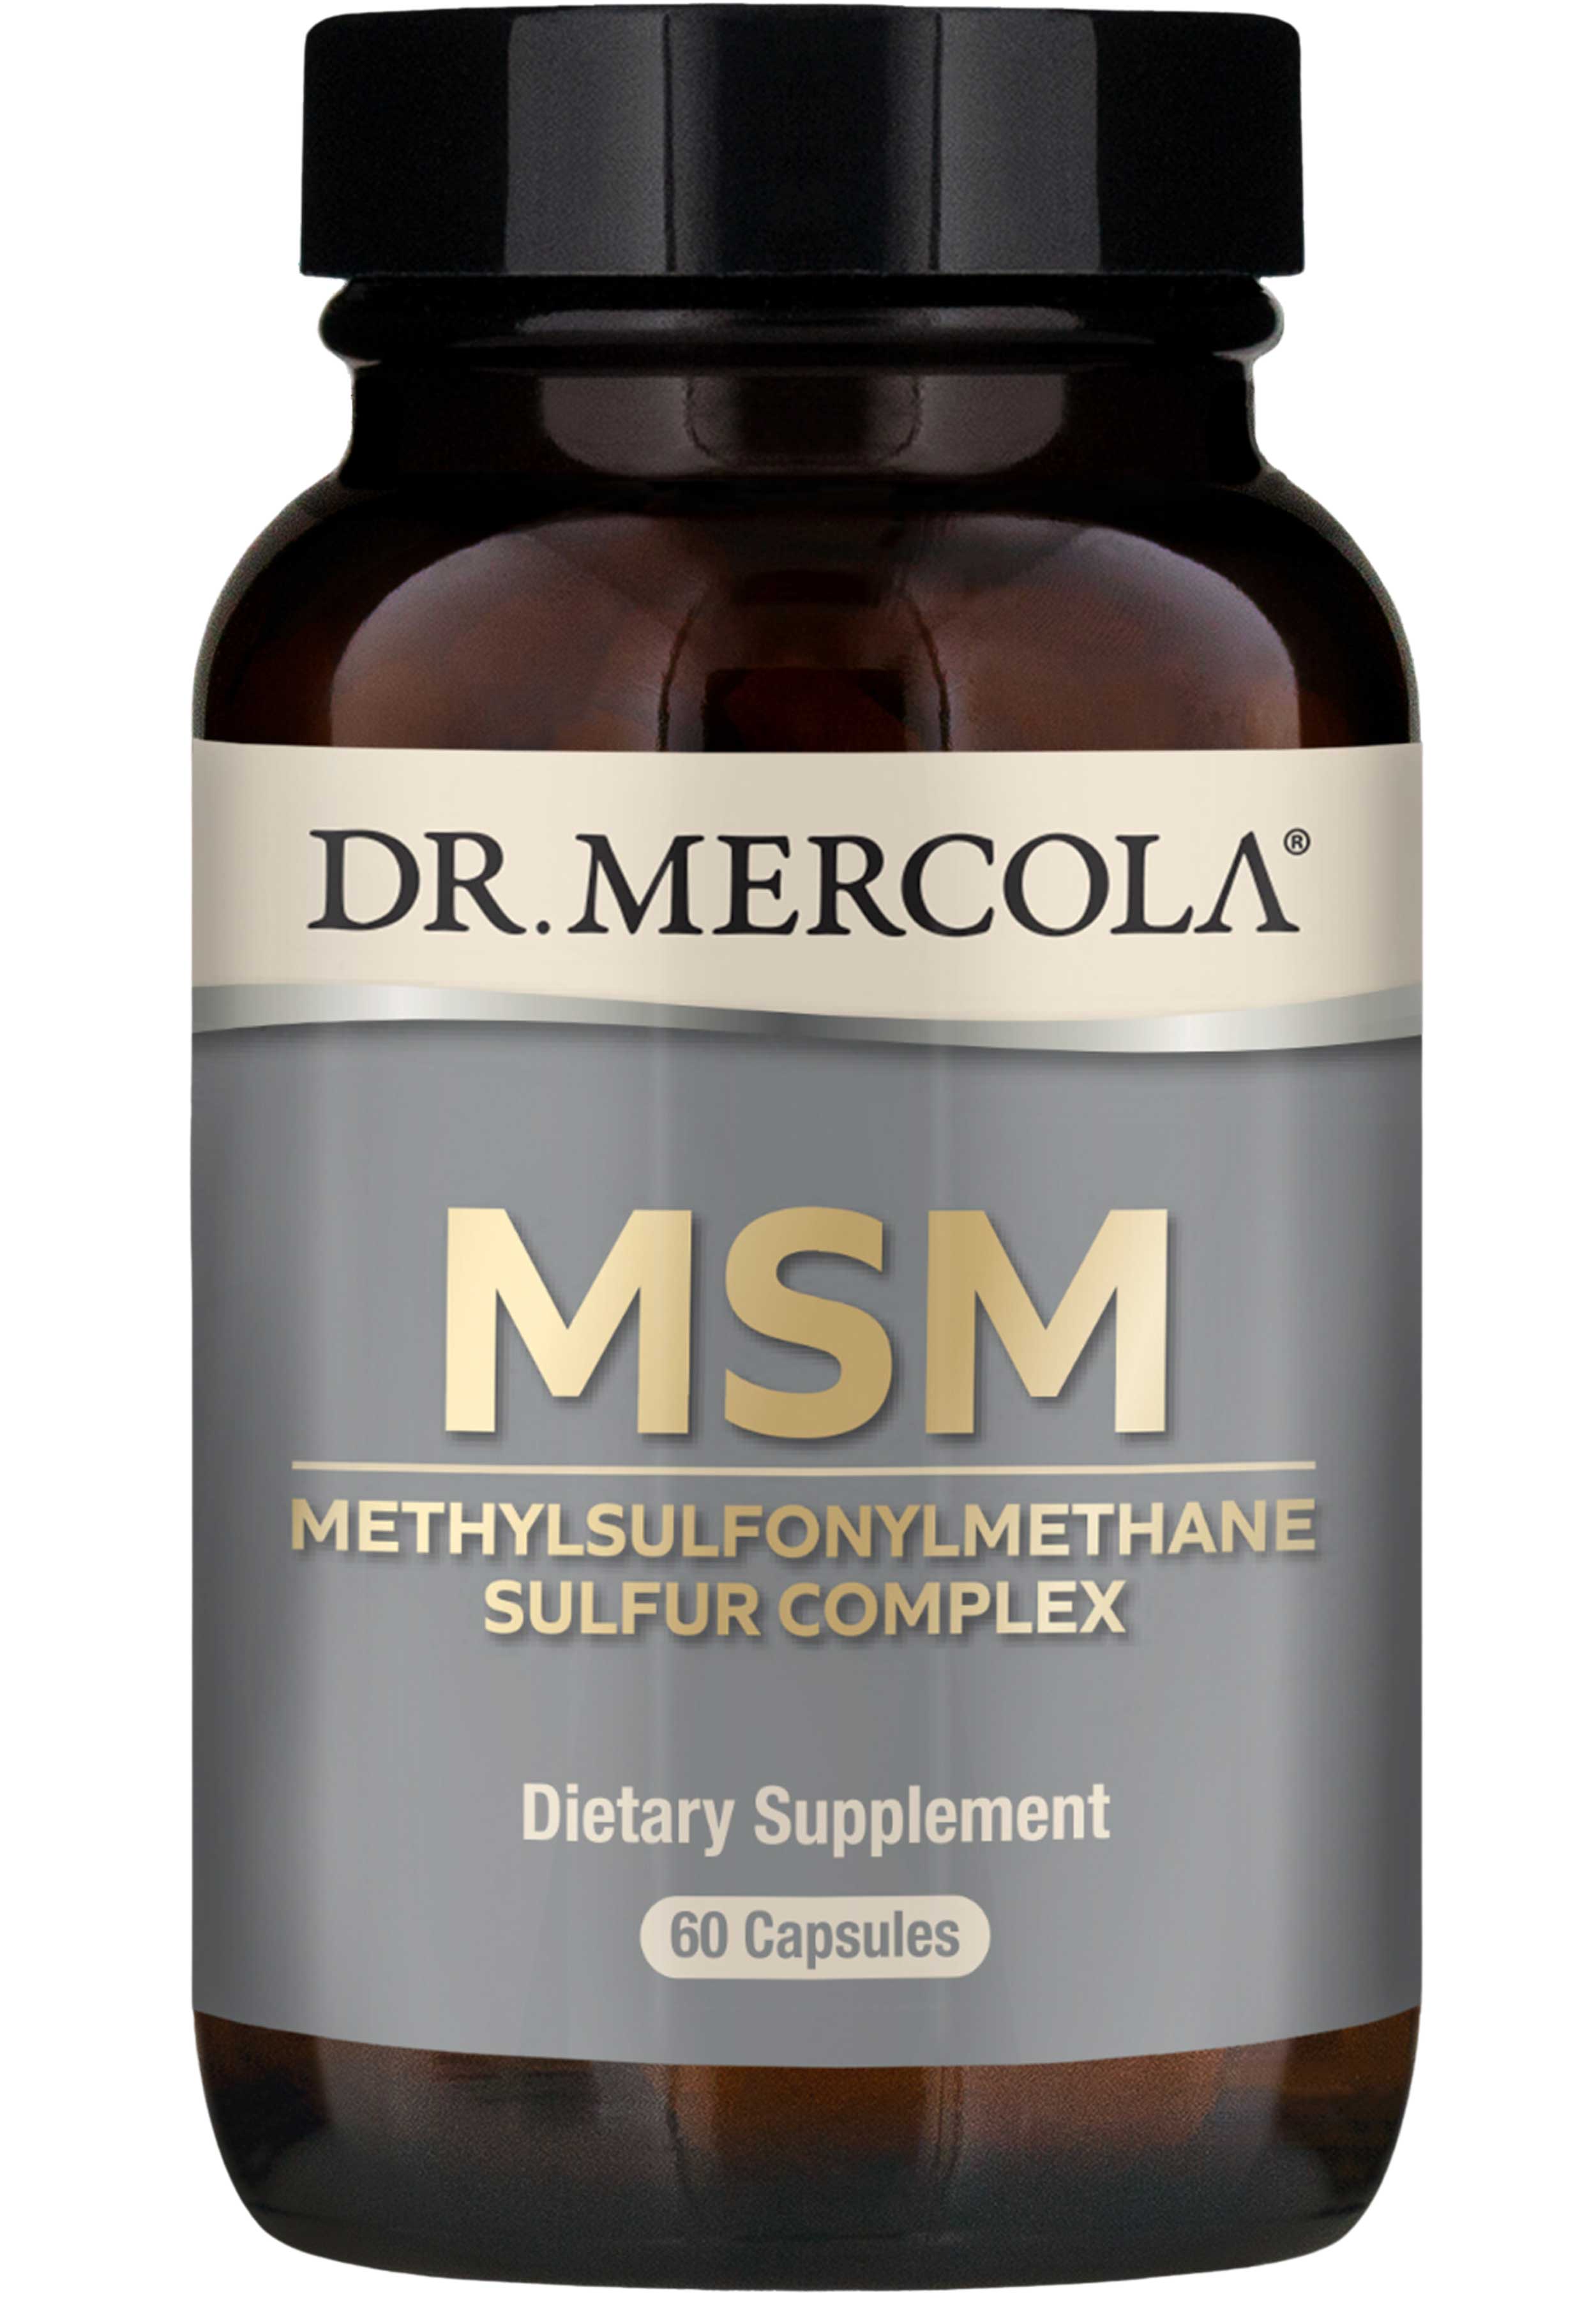 Dr. Mercola MSM with Organic Sulfur Complex